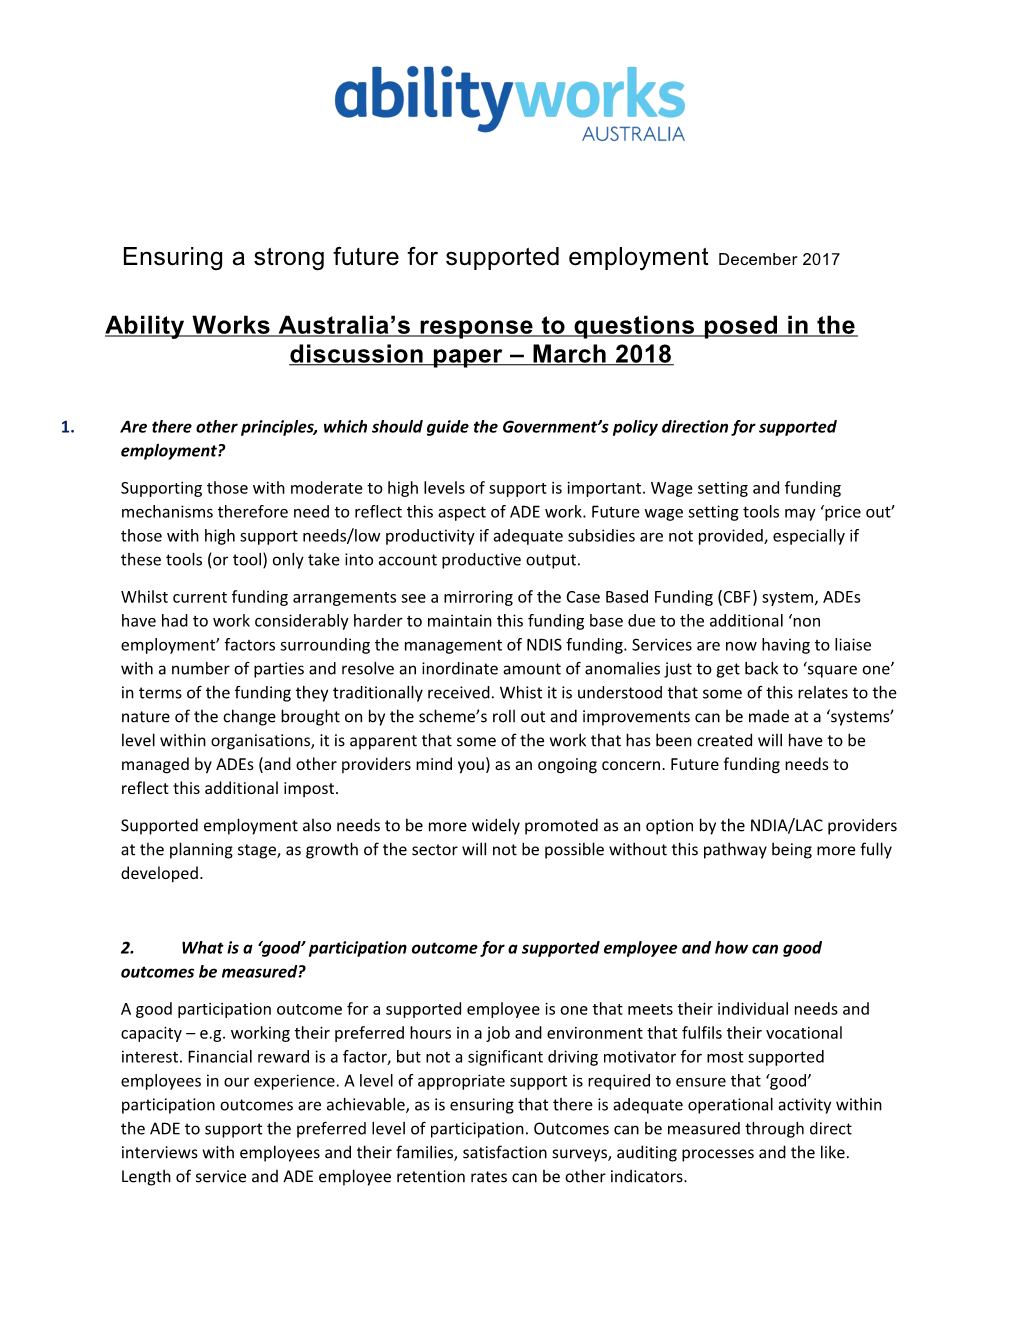 Ability Works Australia S Response to Questions Posed in the Discussion Paper March 2018